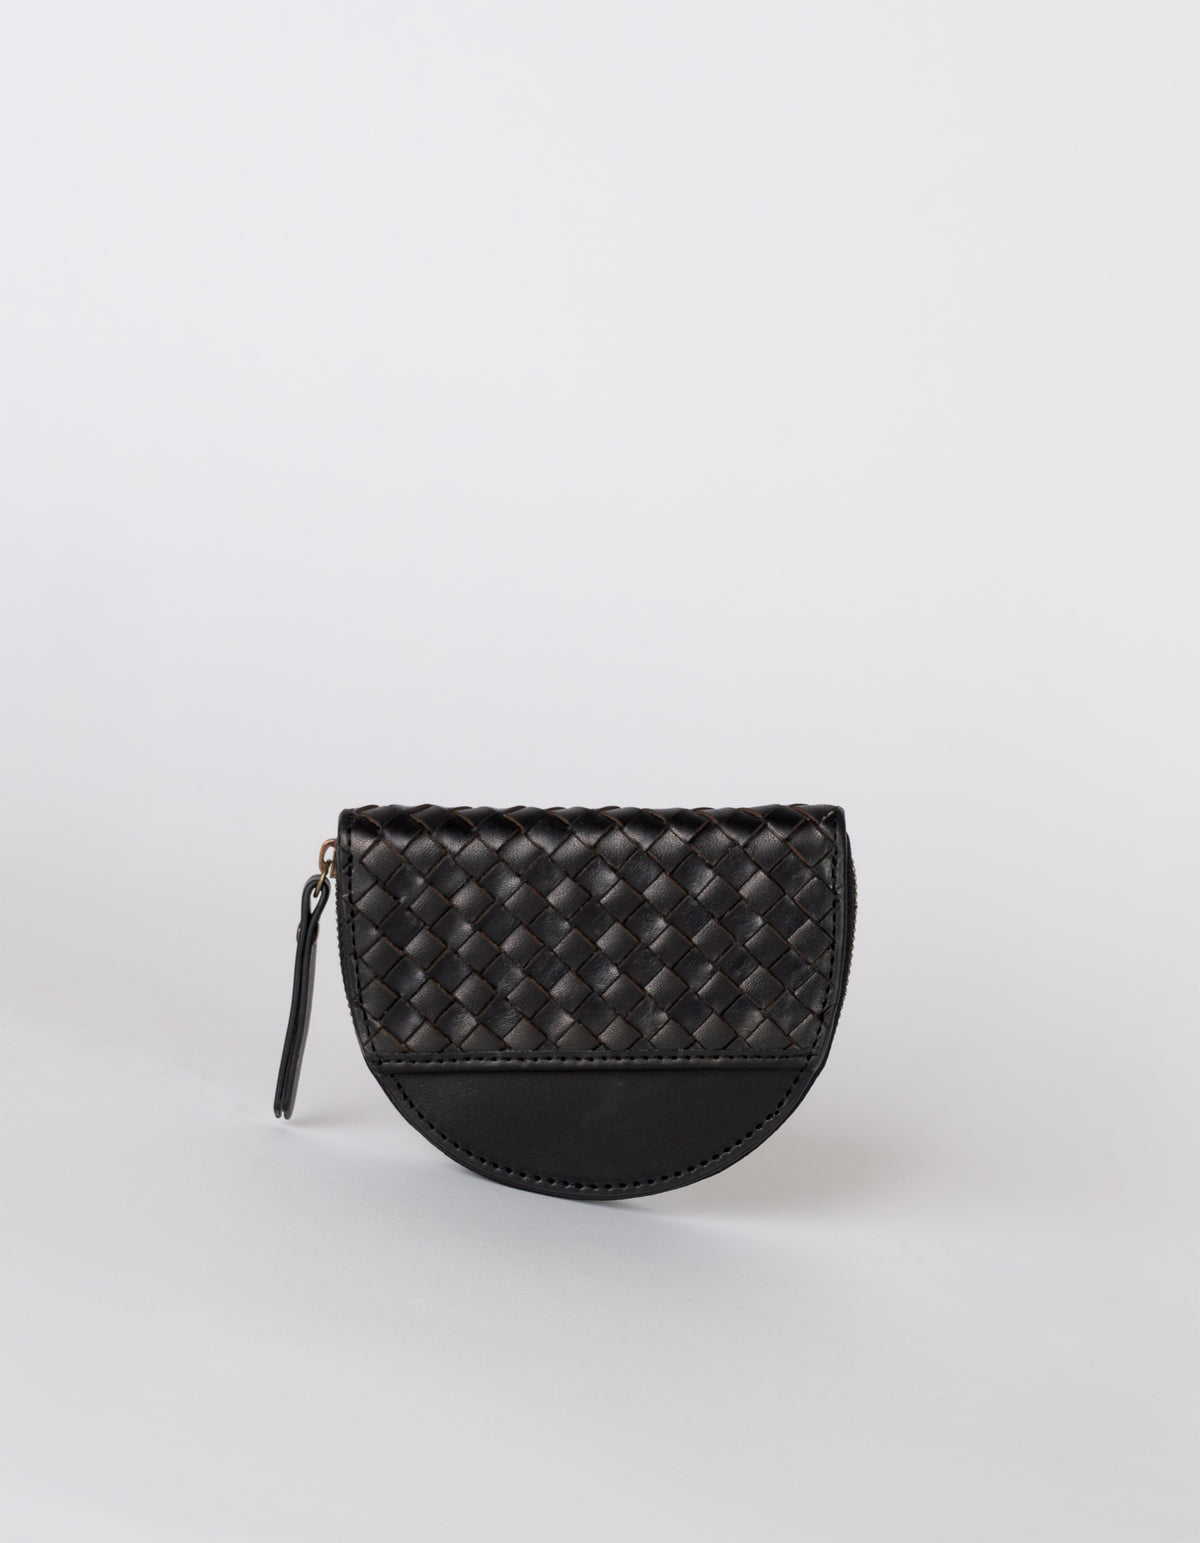 LAURA COIN PURSE, Black Woven Classic Leather